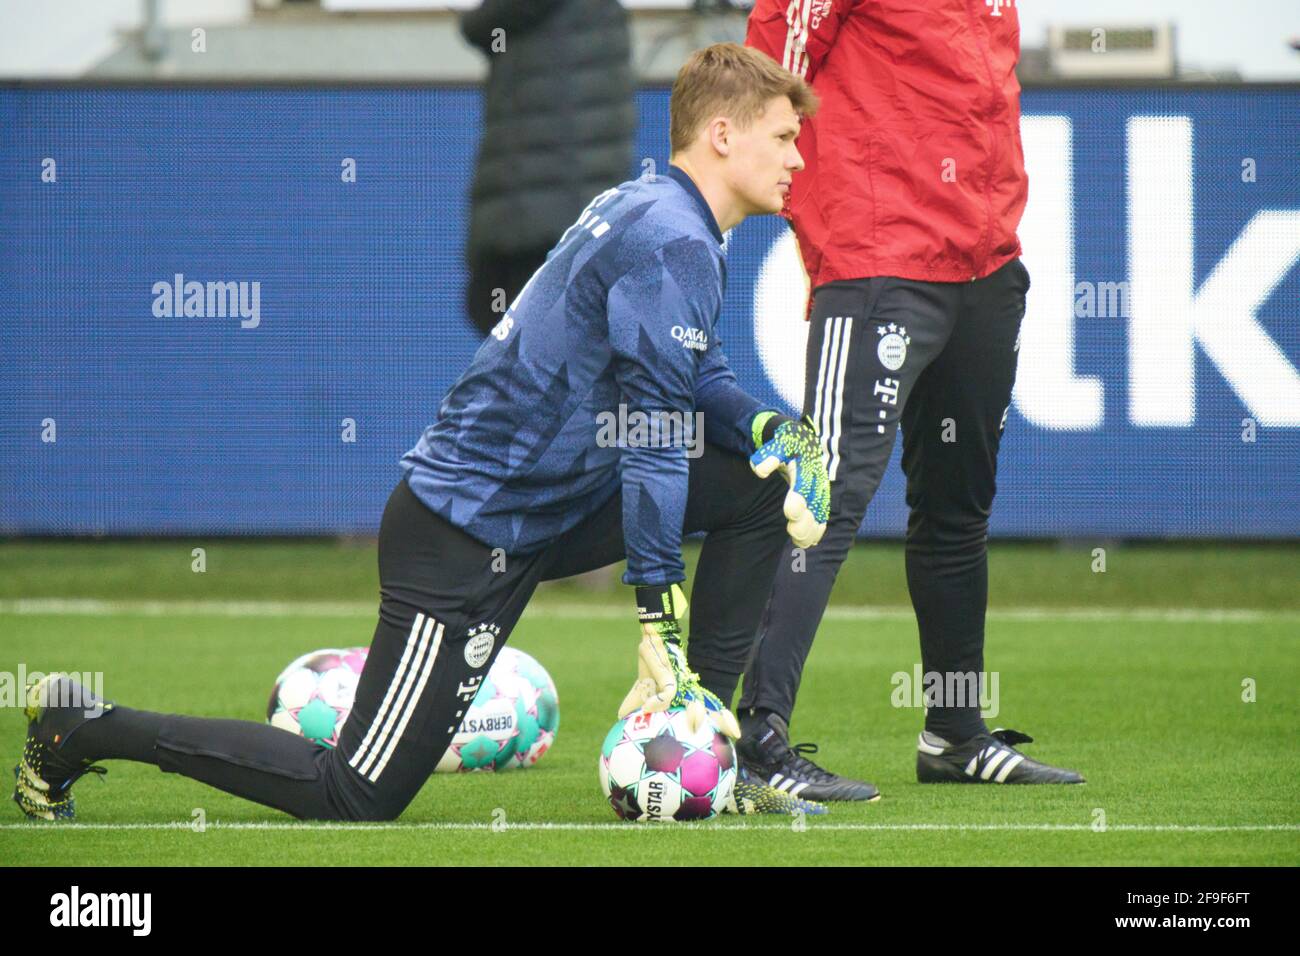 Wolfsburg, Germany. 17th Apr, 2021. Alexander NUEBEL, NÜBEL, goalkeeper FCB 35  in the match VFL WOLFSBURG - FC BAYERN MUENCHEN  2-3 1.German Football League on April 17, 2021 in Wolfsburg, Germany  Season 2020/2021, matchday 29, 1.Bundesliga, FCB, München, 29.Spieltag, Wölfe,  © Peter Schatz / Alamy Live News   - DFL REGULATIONS PROHIBIT ANY USE OF PHOTOGRAPHS as IMAGE SEQUENCES and/or QUASI-VIDEO - Stock Photo